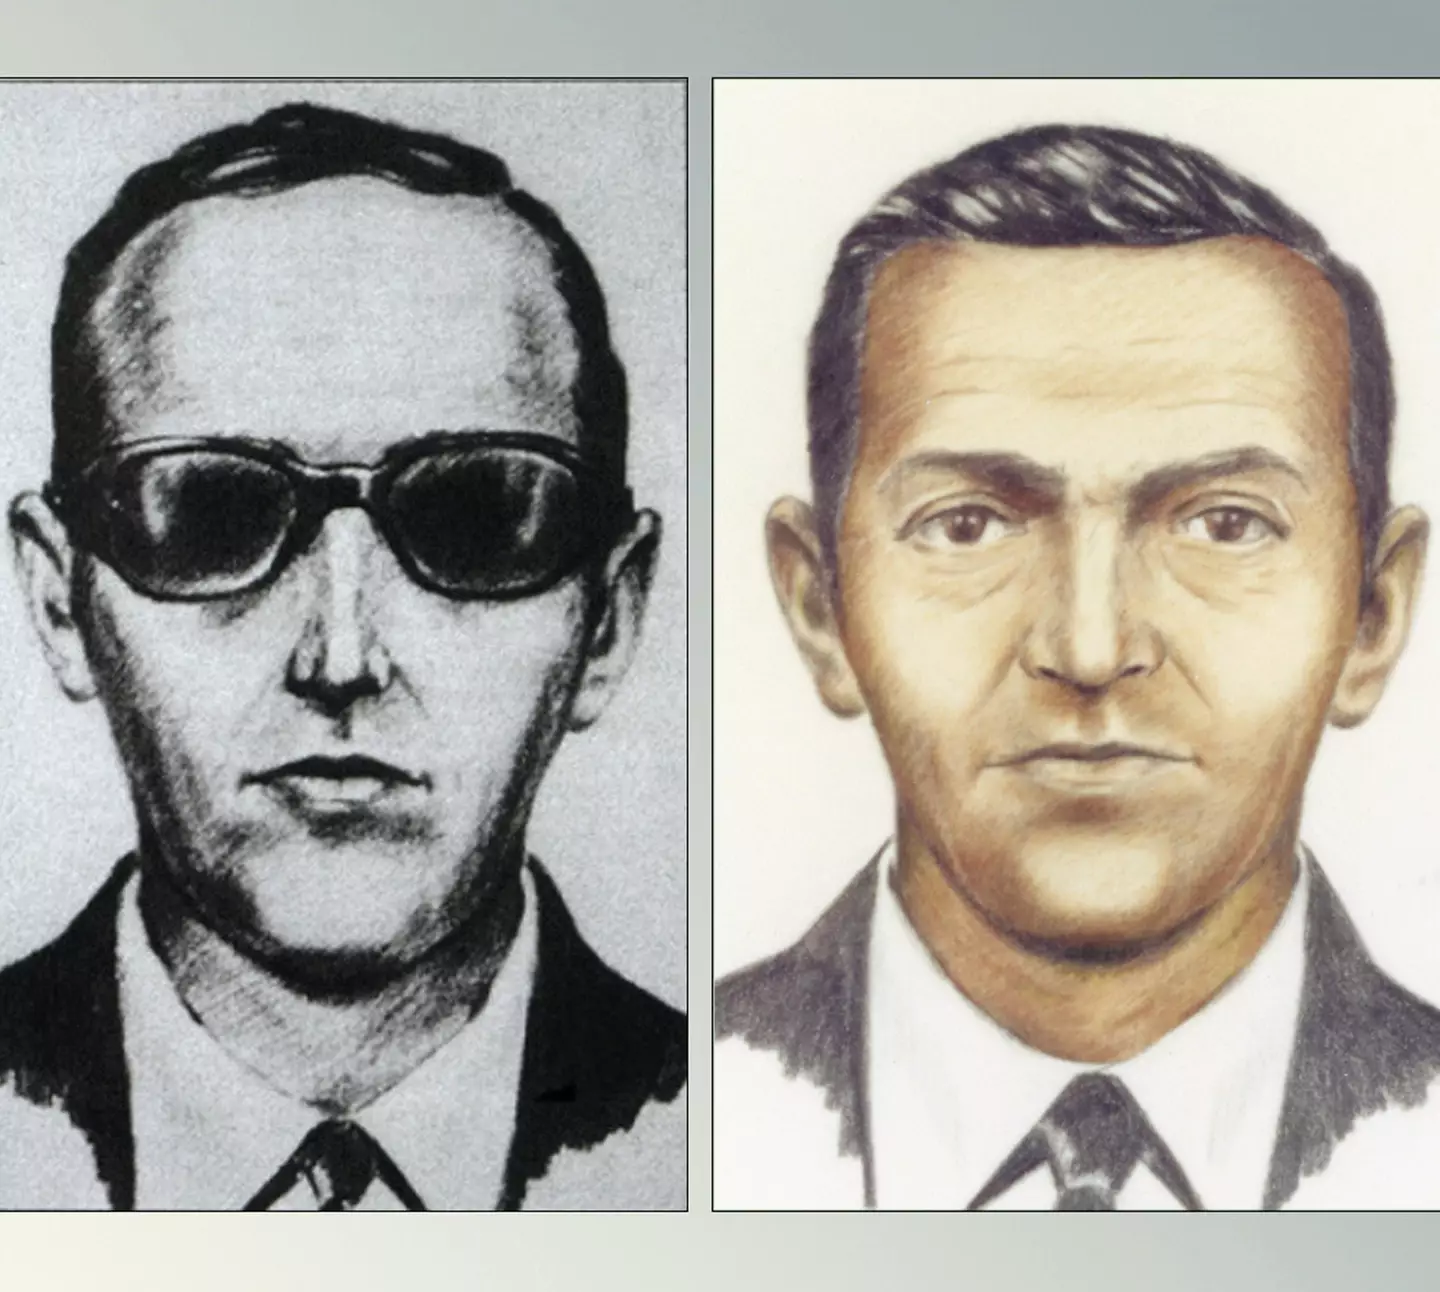 D.B. Cooper skyjacked a flight over half a century ago, but his case remains a mystery.